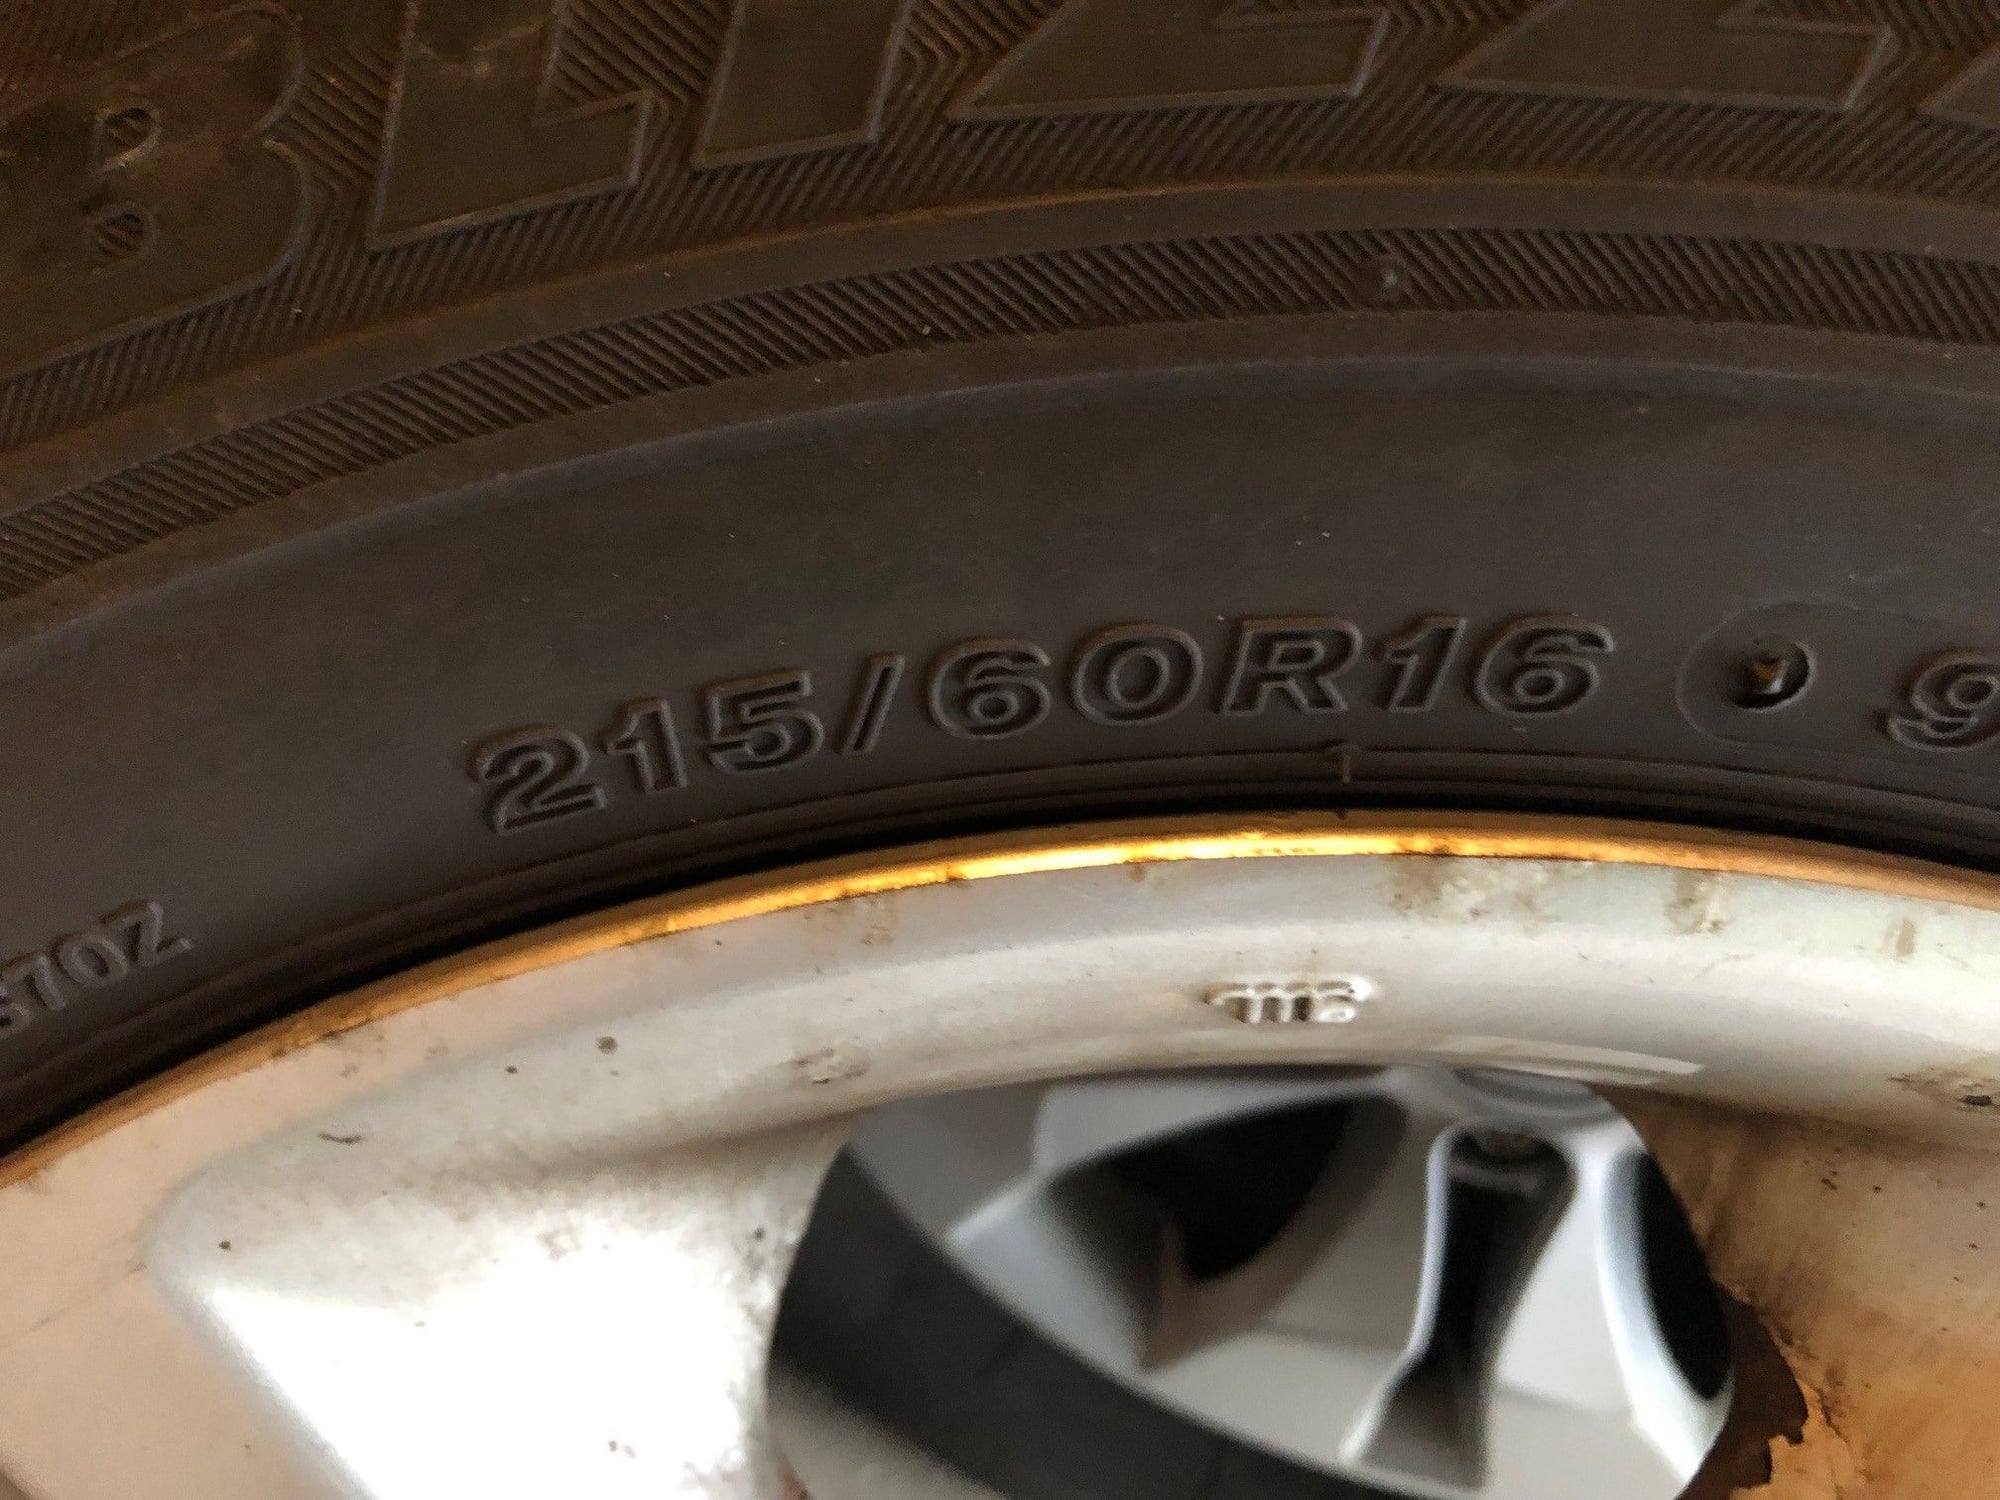 Wheels and Tires/Axles - IL 2004 Lexus GS 300 16 Inch Wheels and Blizzak Winter Tires 215/60/16 - Used - 1998 to 2005 Lexus GS300 - Northbrook, IL 60062, United States